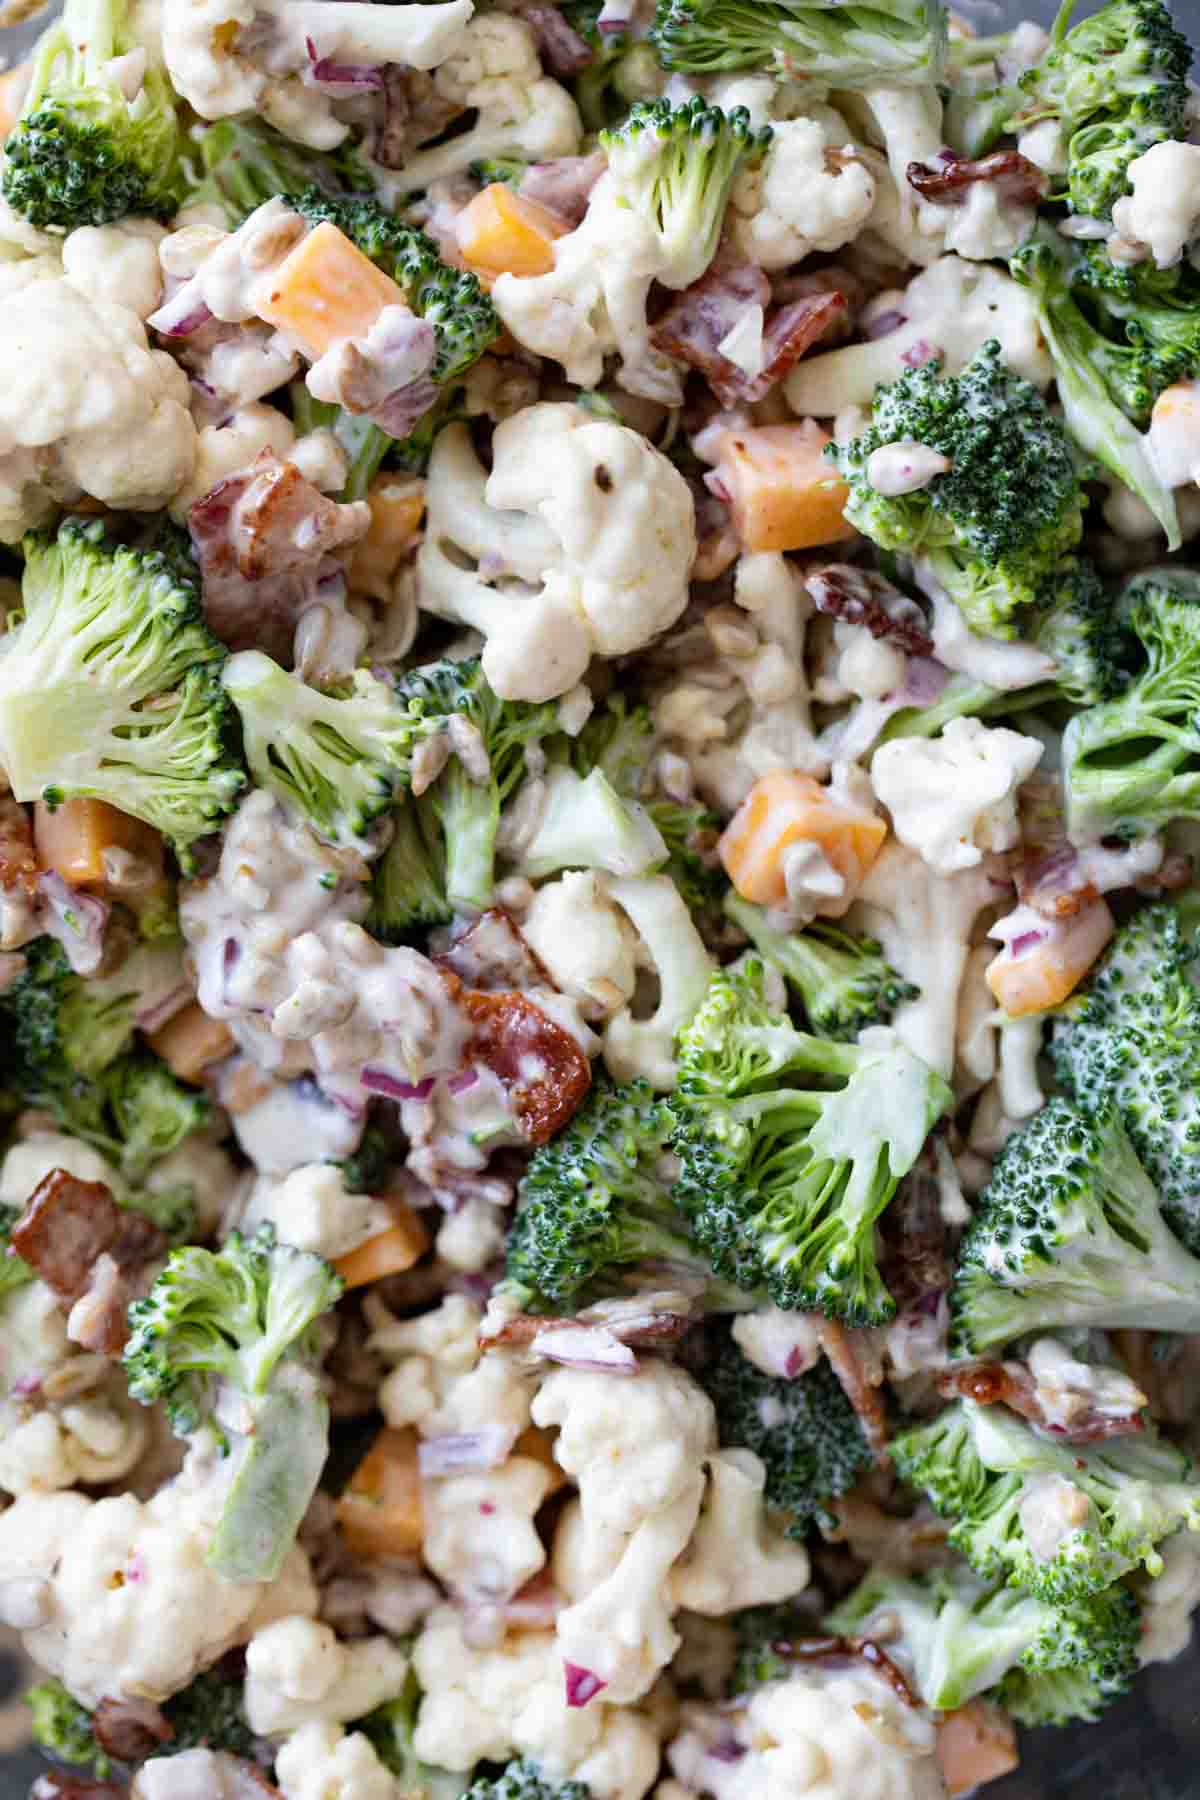 Broccoli Cauliflower Salad with a tangy dressing.